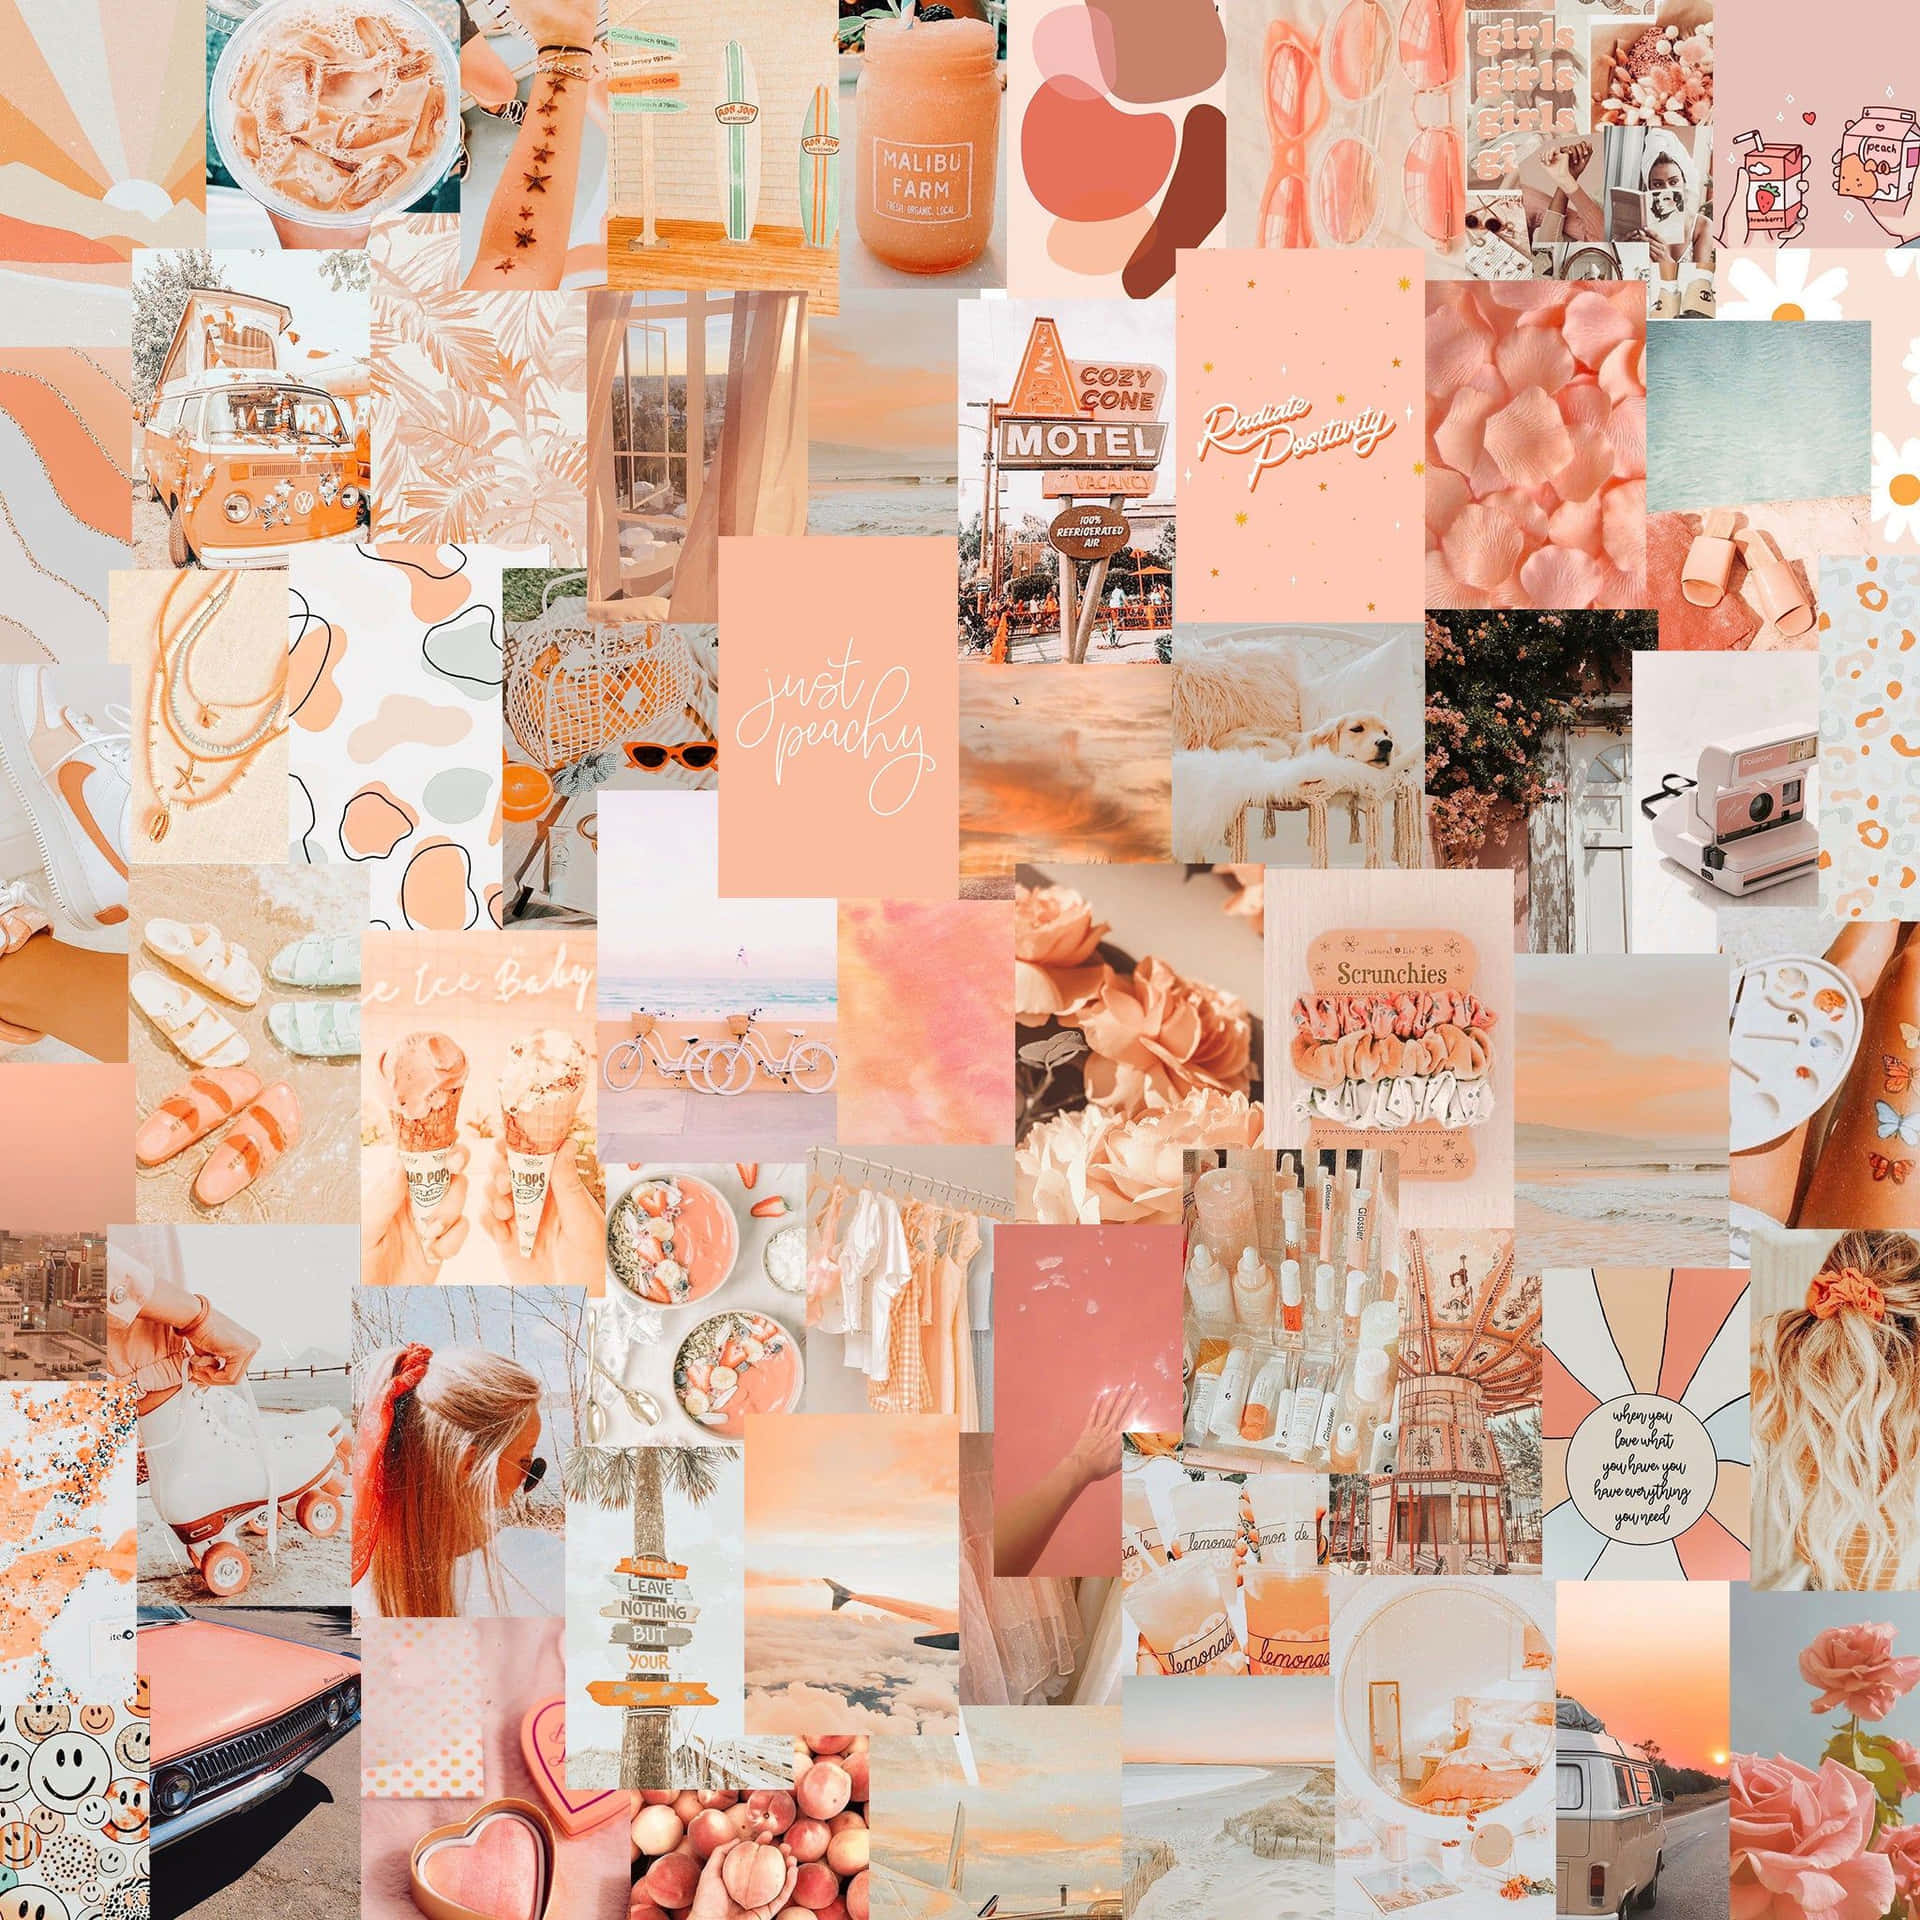 A Collage Of Pictures And Photos In Peach And Pink